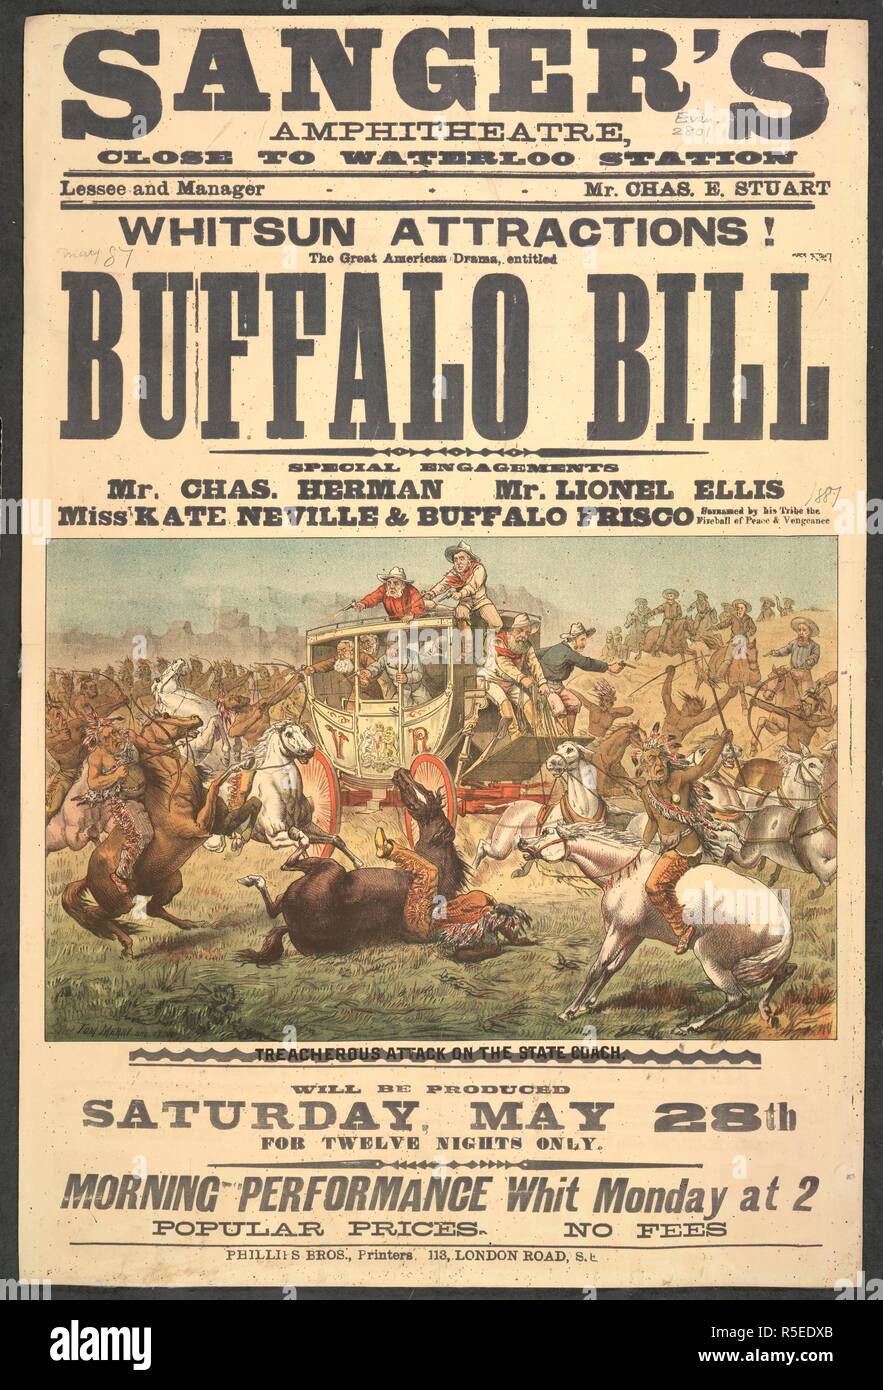 Sanger's Amphitheatre ... Whitsun attractions! The great American drama, entitled Buffalo Bill. Special engagements Mr. Chas. Herman, Mr. Lionel Ellis, Miss Kate Neville & Buffalo Frisco â€¦ Will be produced Saturday May 28th â€¦ no fees. A lithograph illustration entitled: Treacherous attack on the State Coach. [London] : Phillips Bros., printers, 113 London Road, 1887. Source: Evan.2801. Language: English. Stock Photo